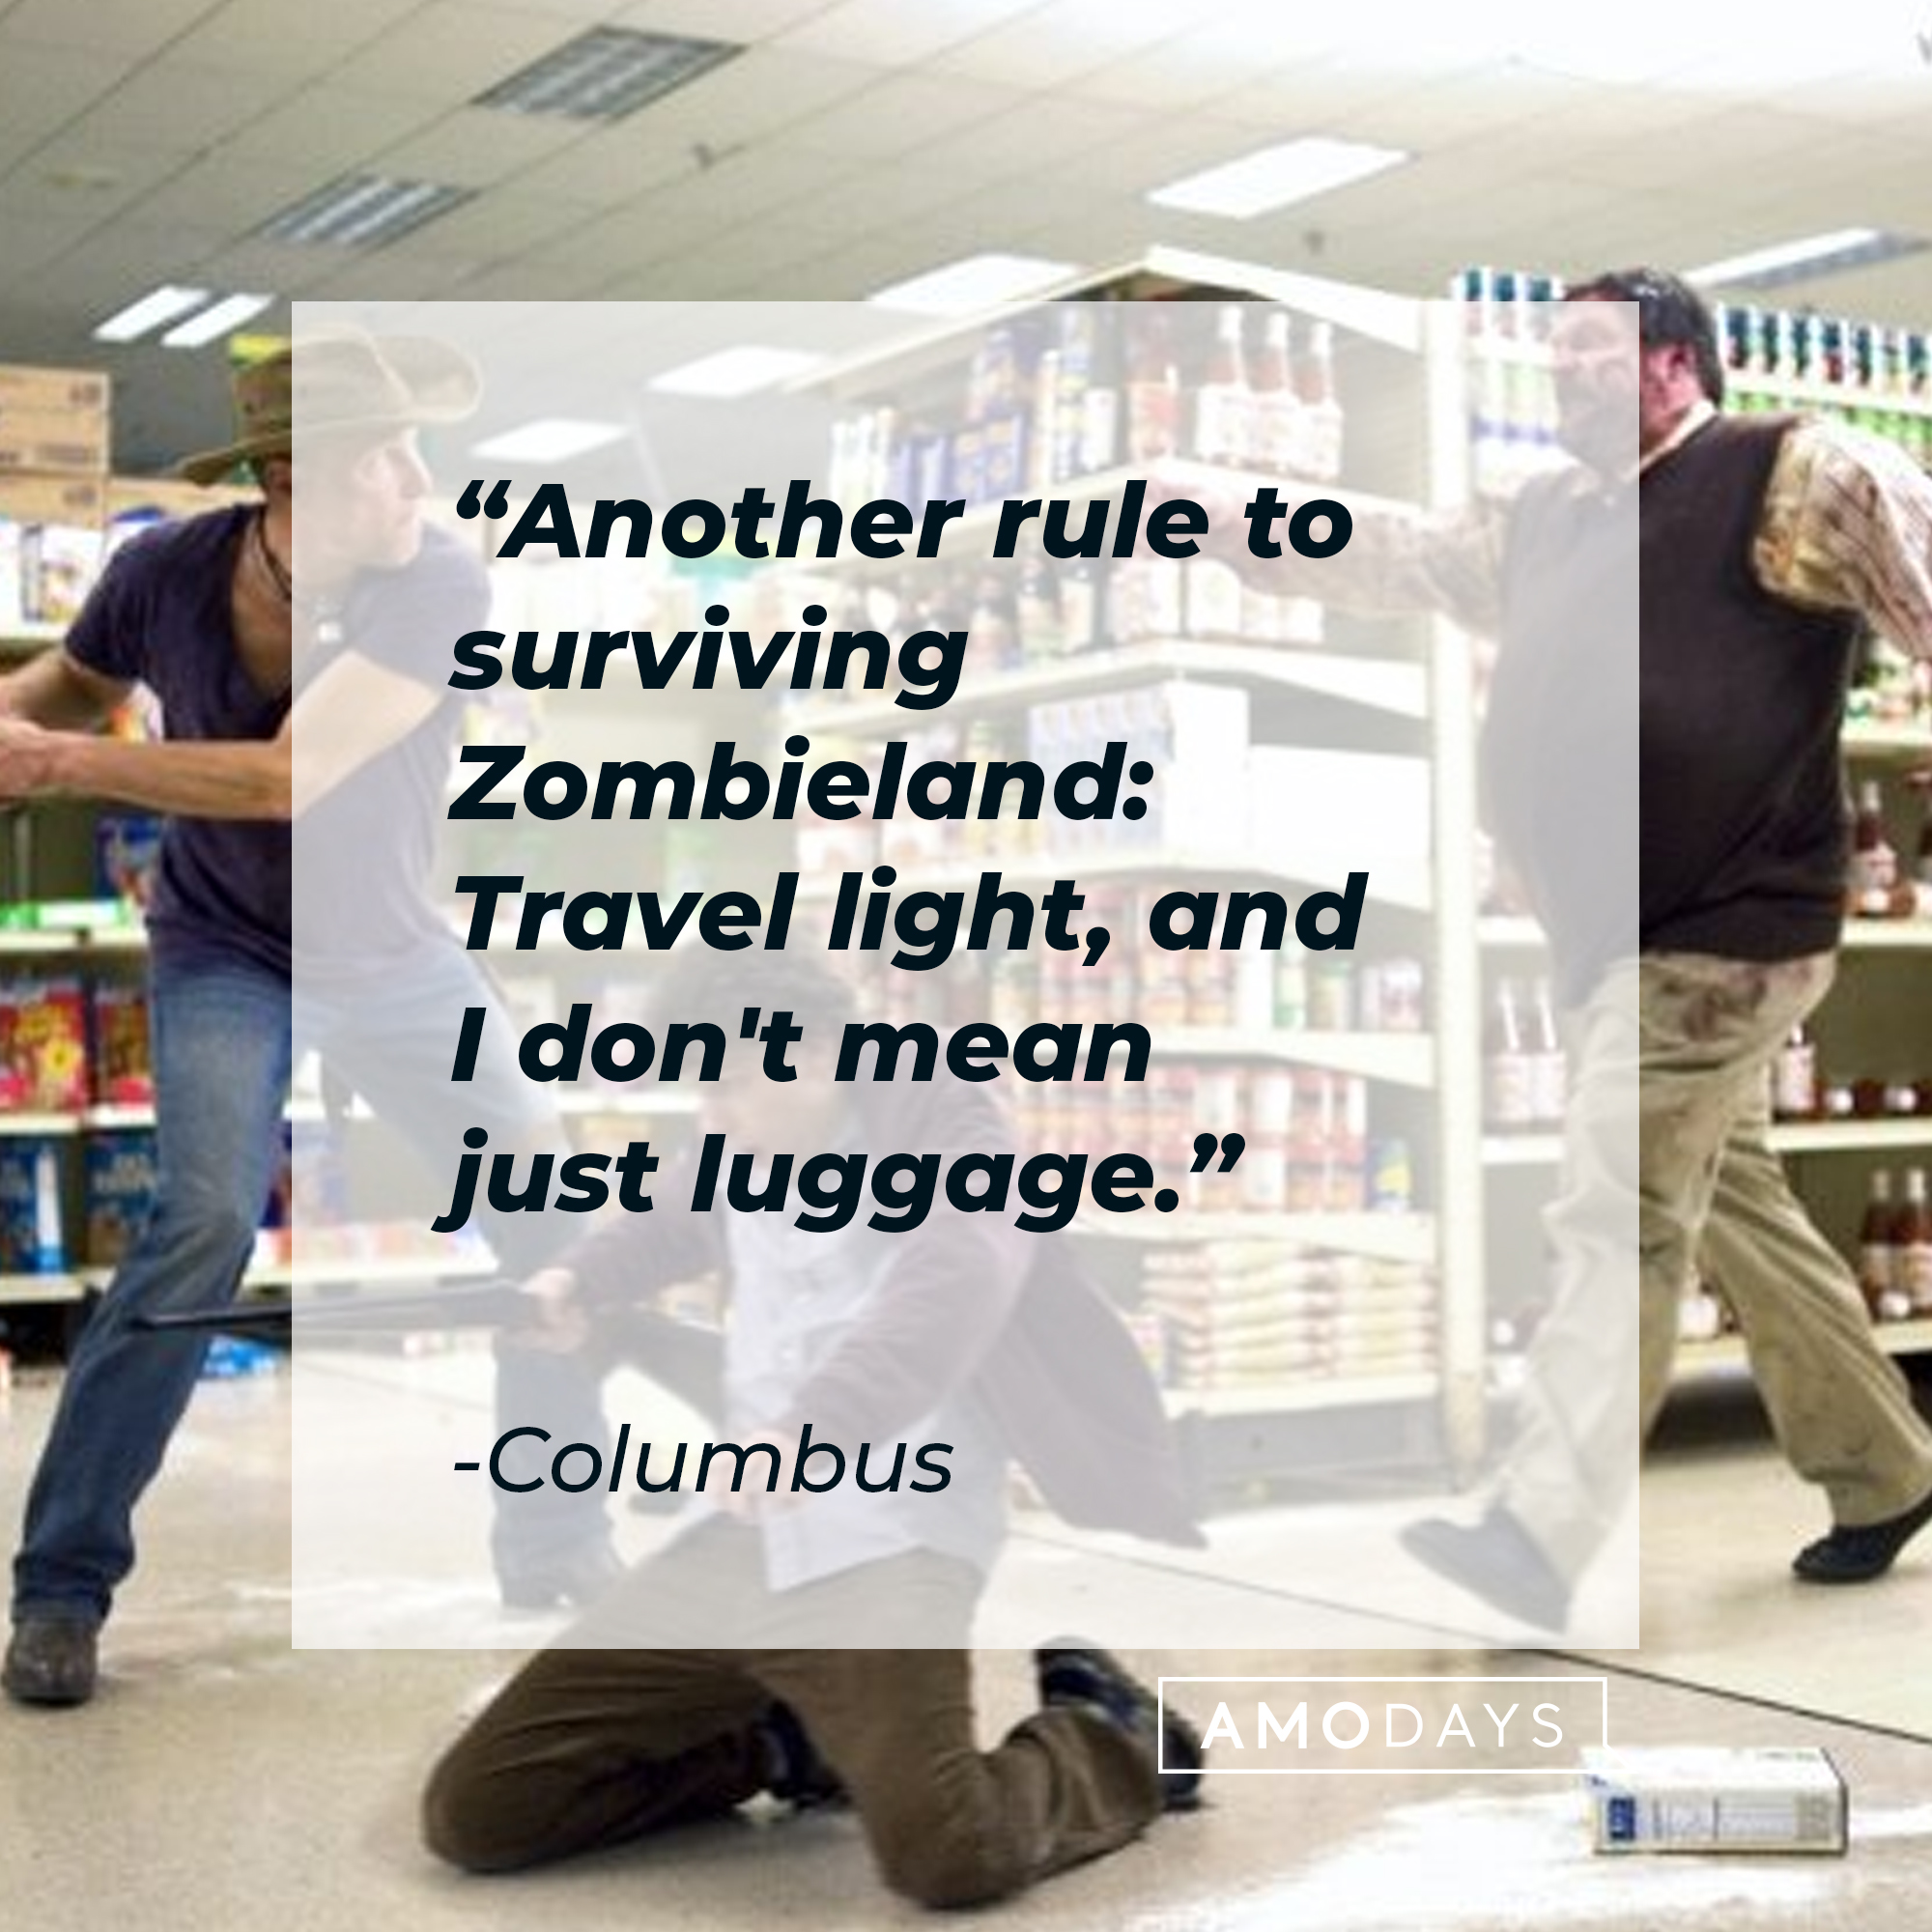 Columbus' quote: "Another rule to surviving Zombieland: Travel light, and I don't mean just luggage." | Source: Facebook.com/Zombieland